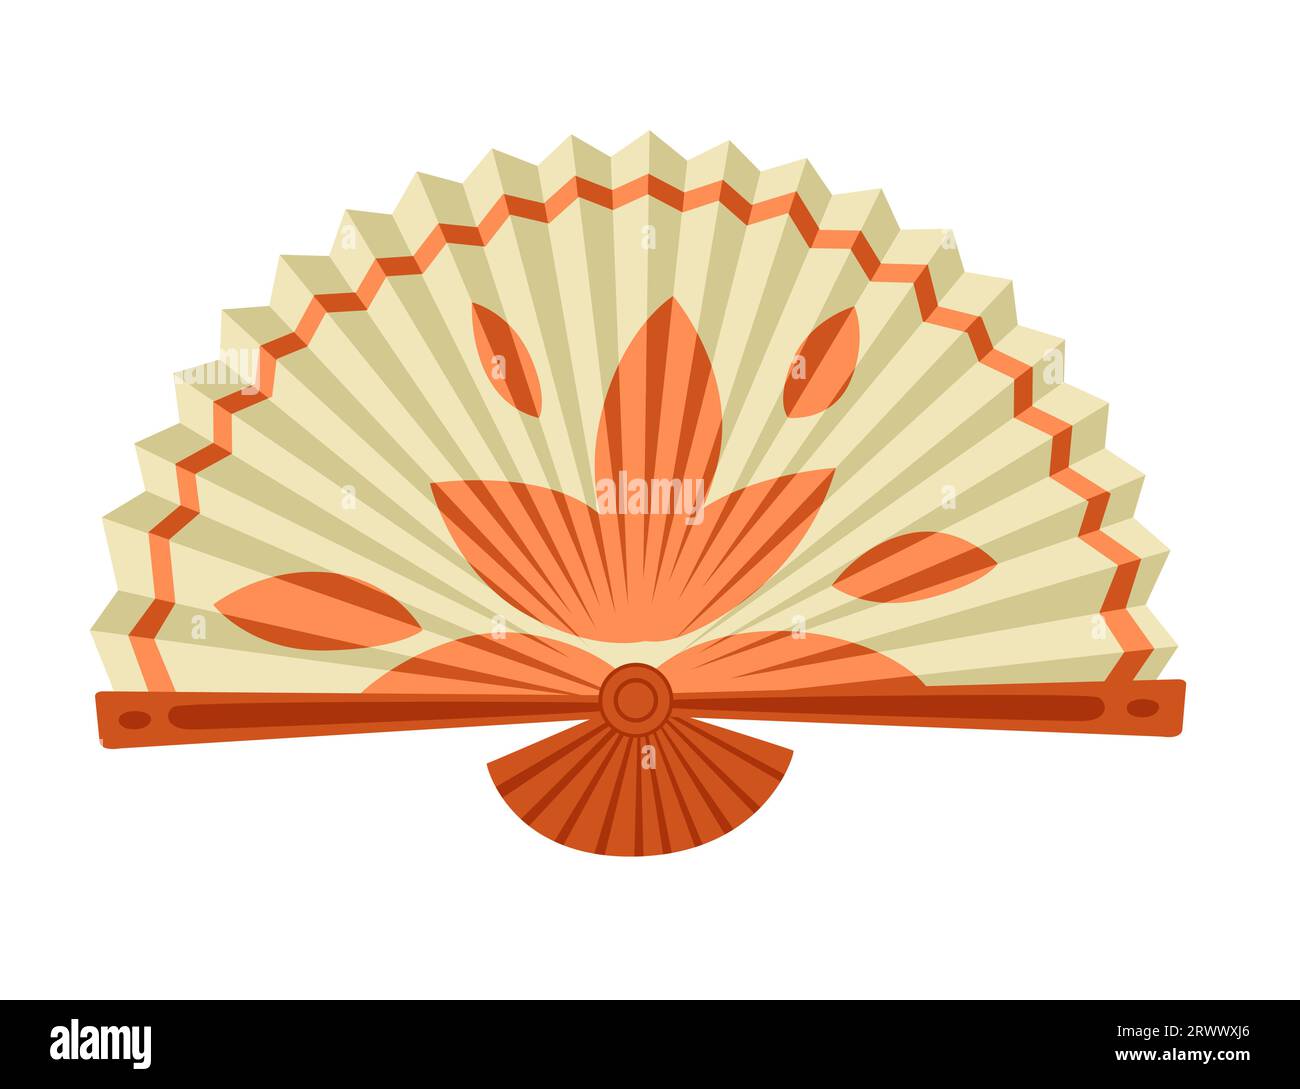 Classic asian style wooden hand fan with colorful drawing pattern vector illustration isolated on white background Stock Vector